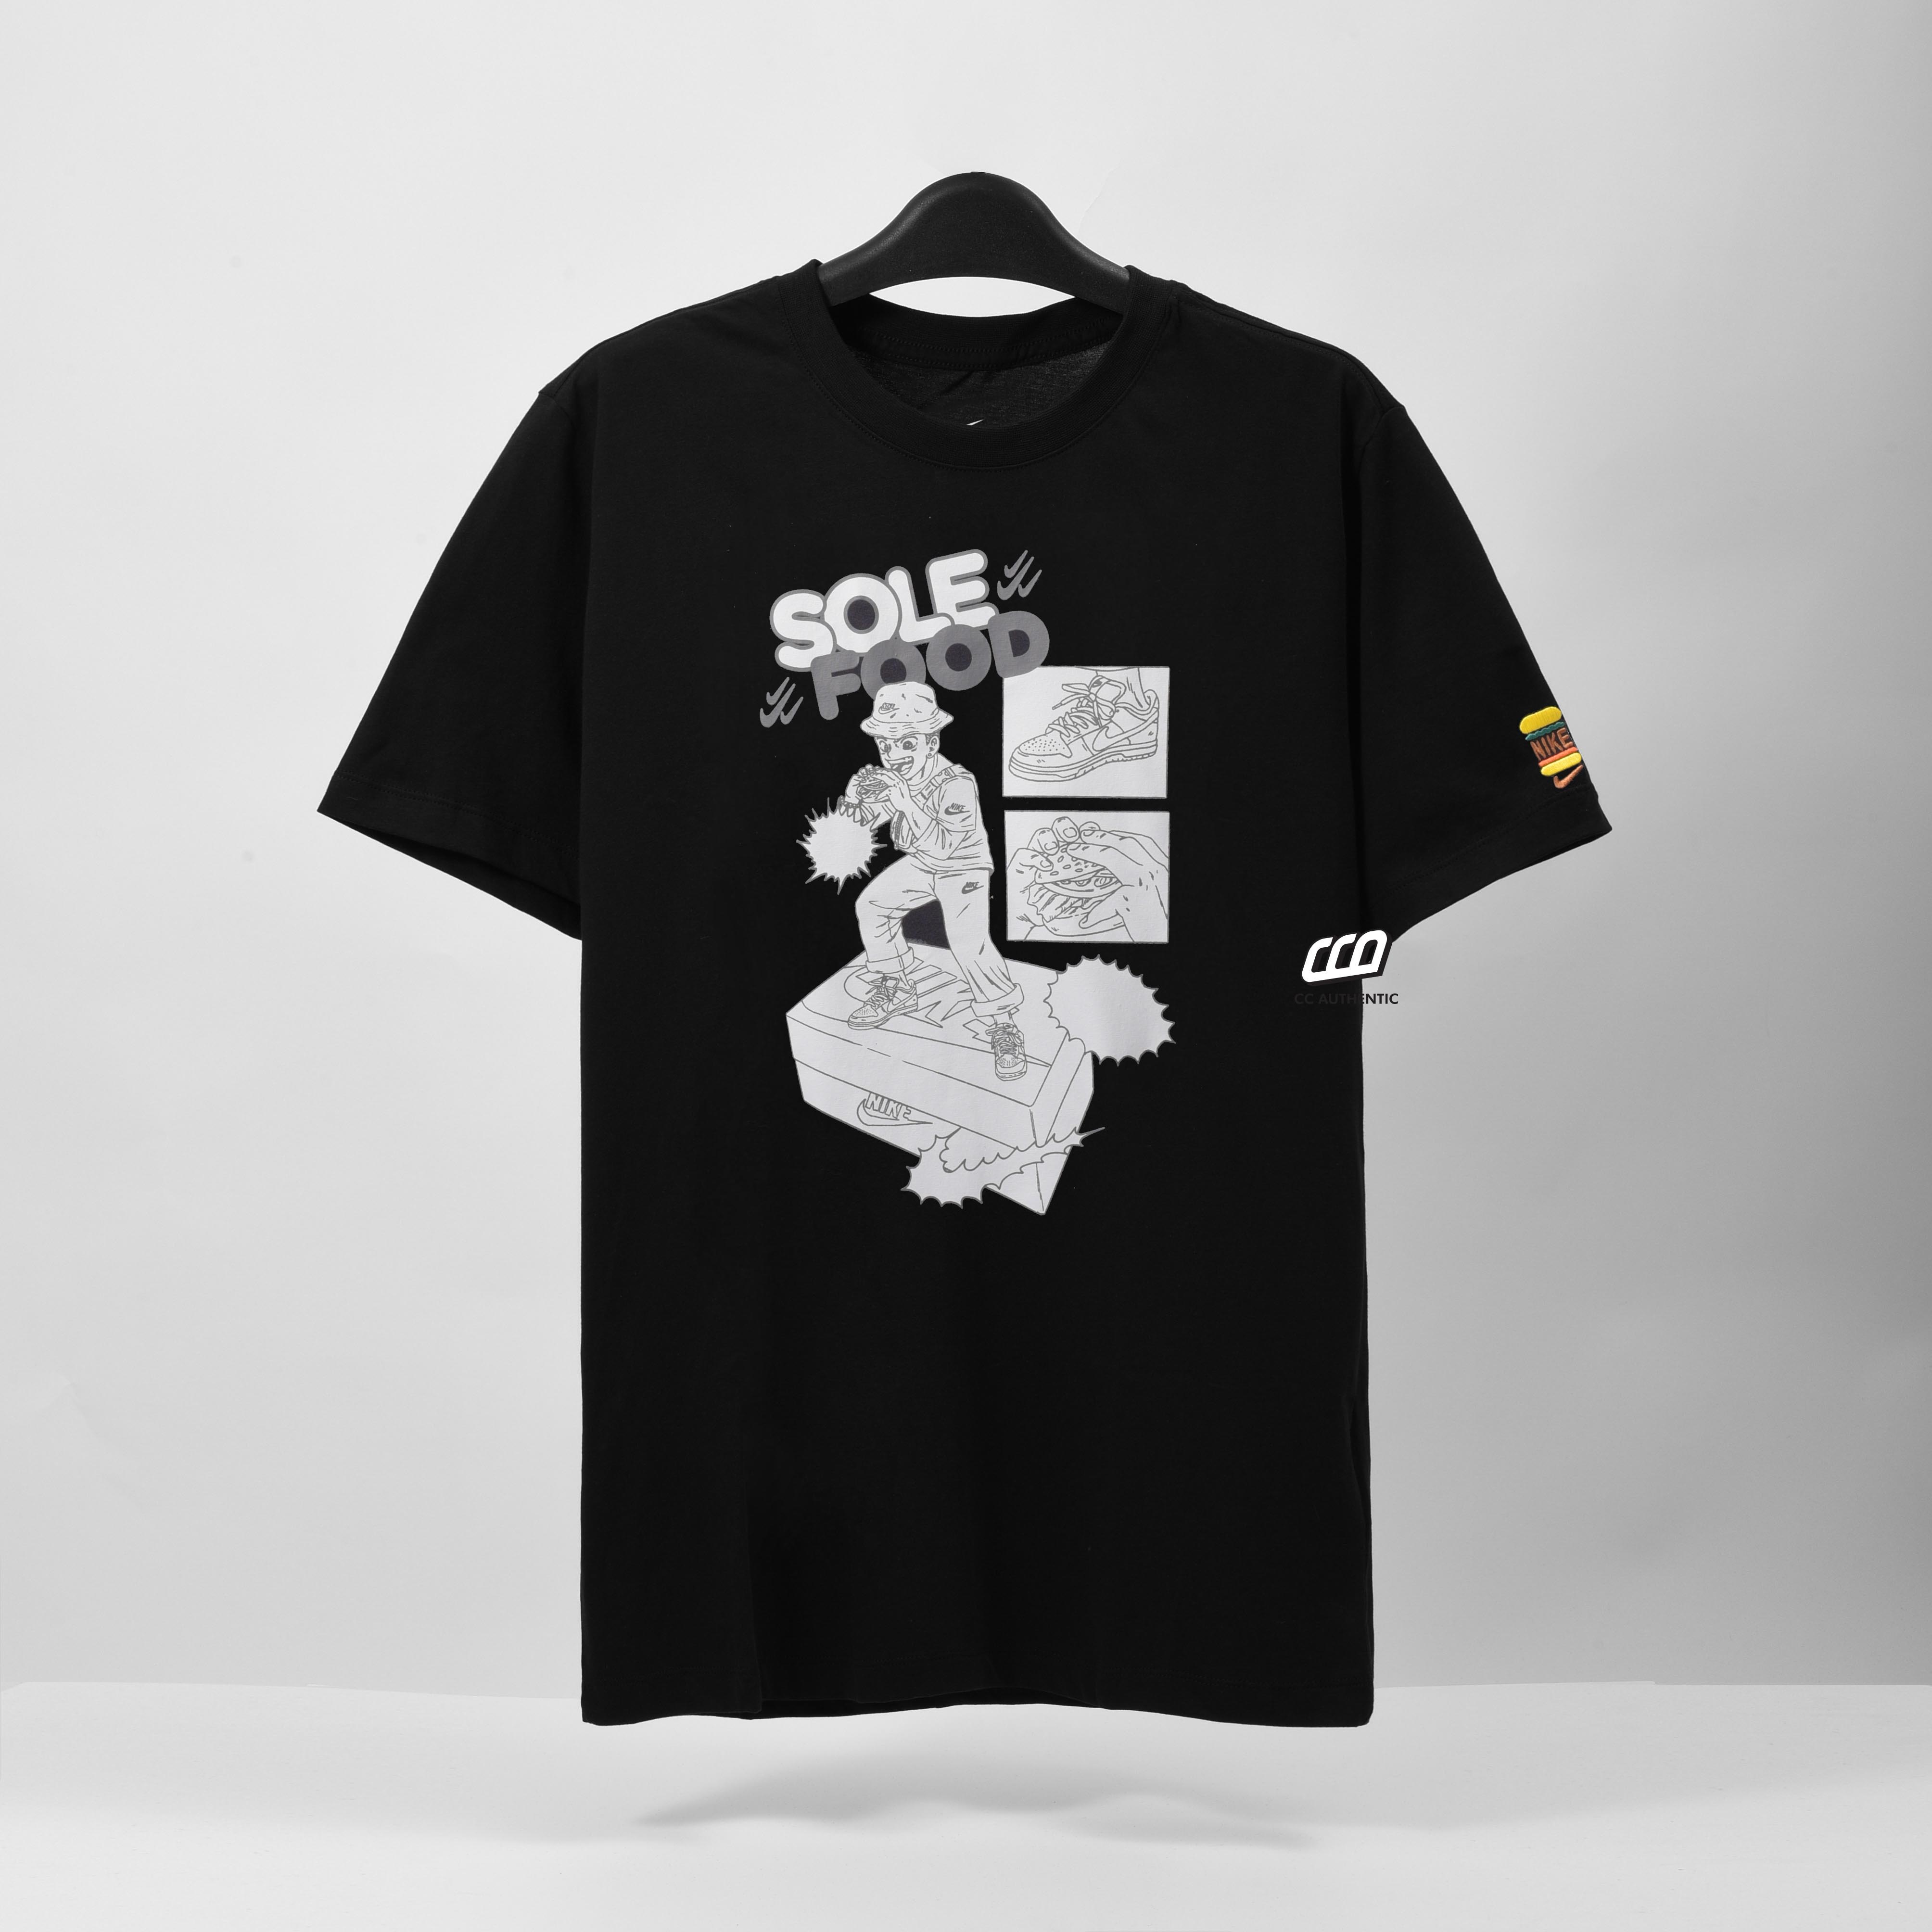 NIKE SNEAKER OBSESSED SOLE FOOD GRAPHIC T-SHIRT - BLACK